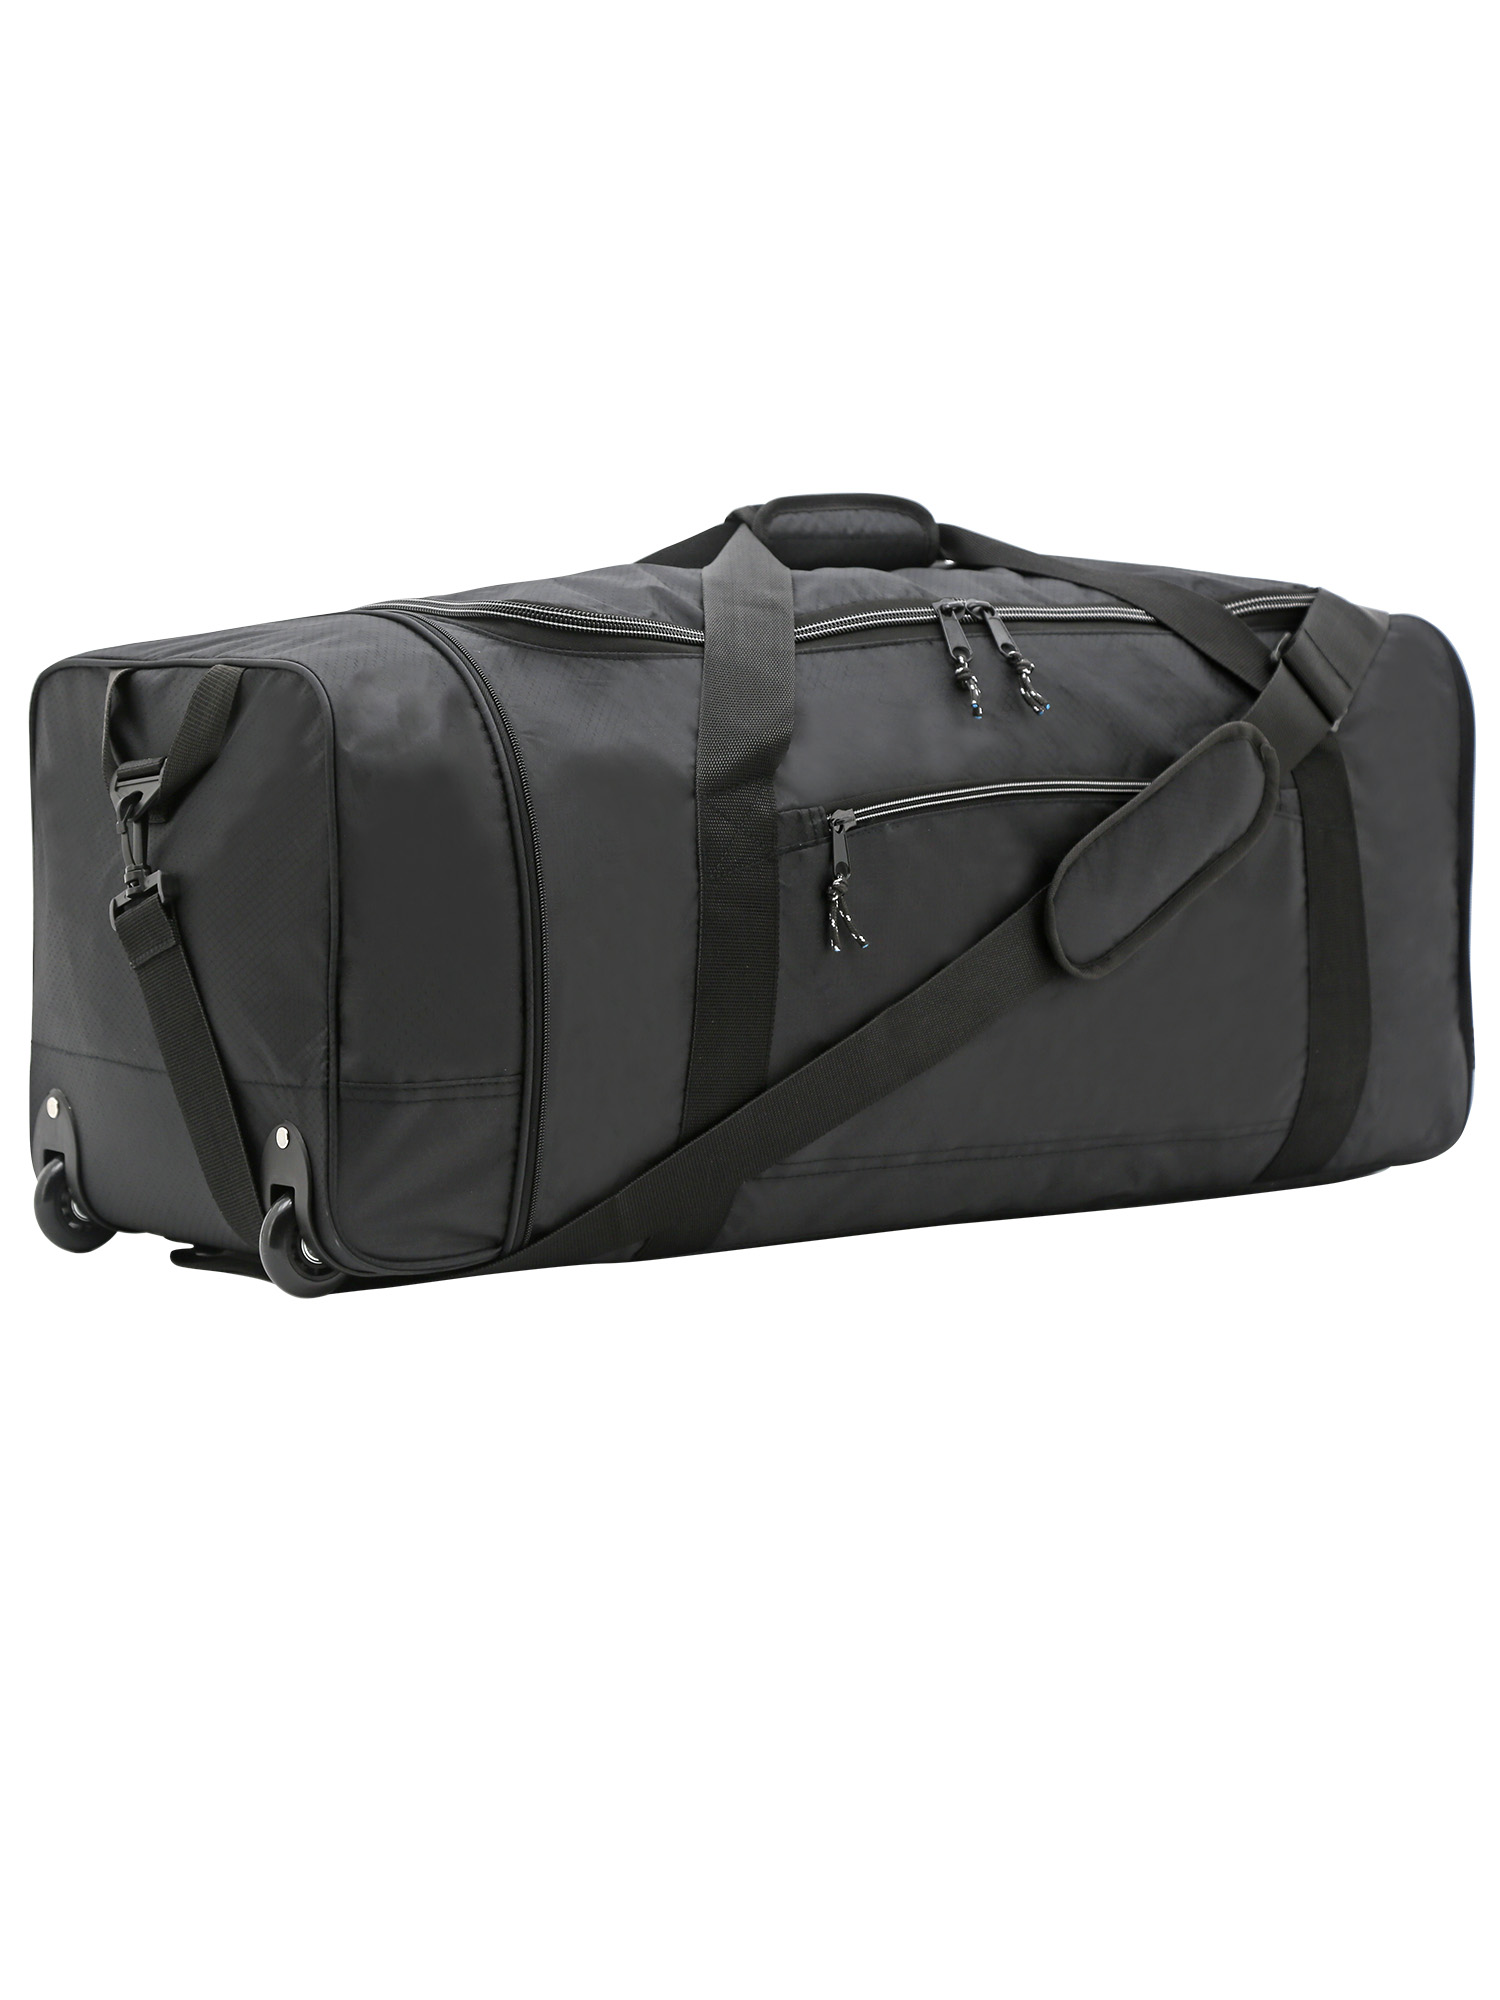 Protege 32" Wheeled and Compactible Polyester Rolling Duffel Bag, Black - image 1 of 8